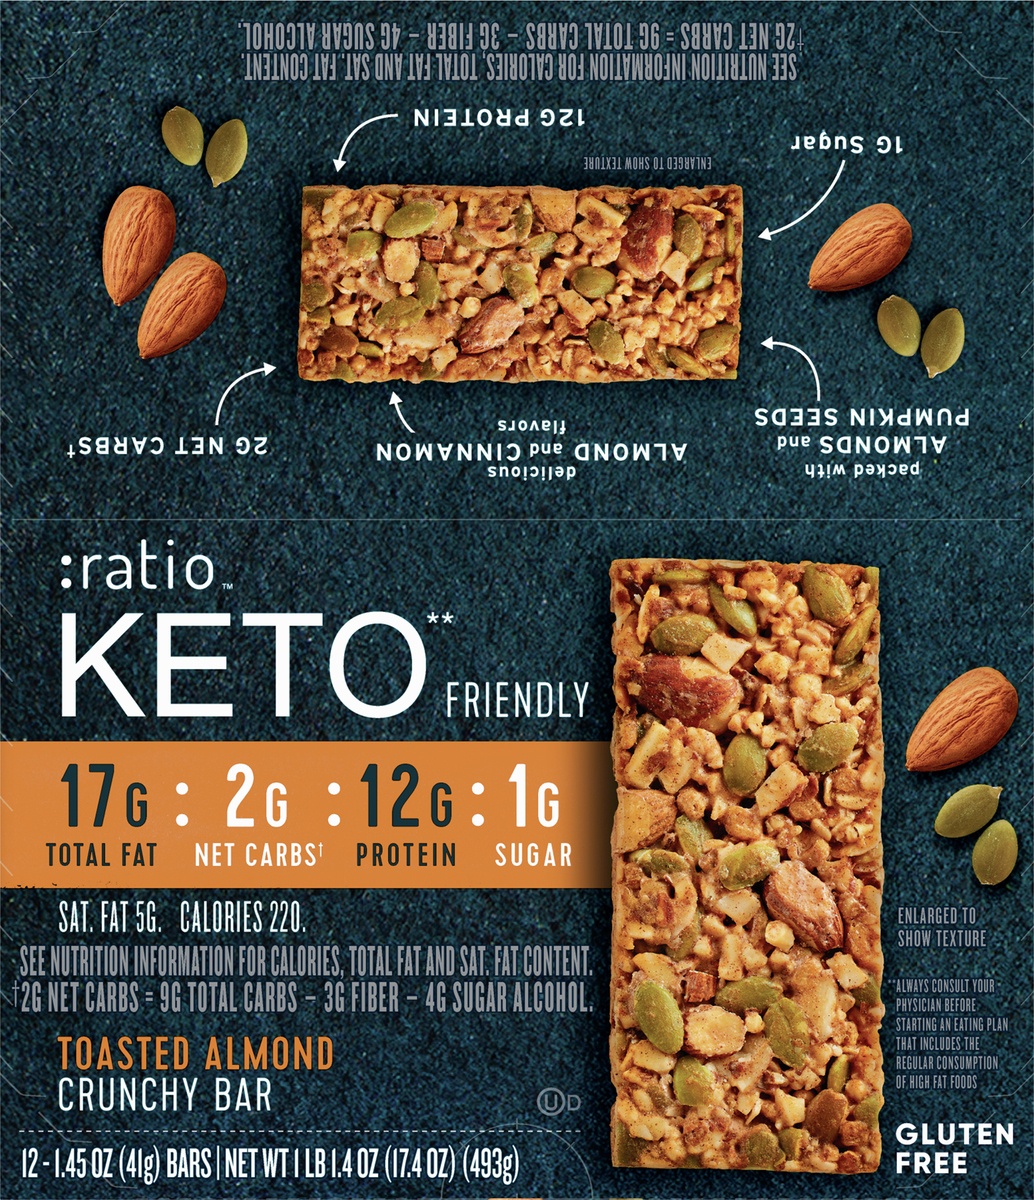 slide 6 of 11, :ratio KETO Friendly Crunchy Bars, Toasted Almond, Gluten Free Snack, 12 ct, 17.4 oz